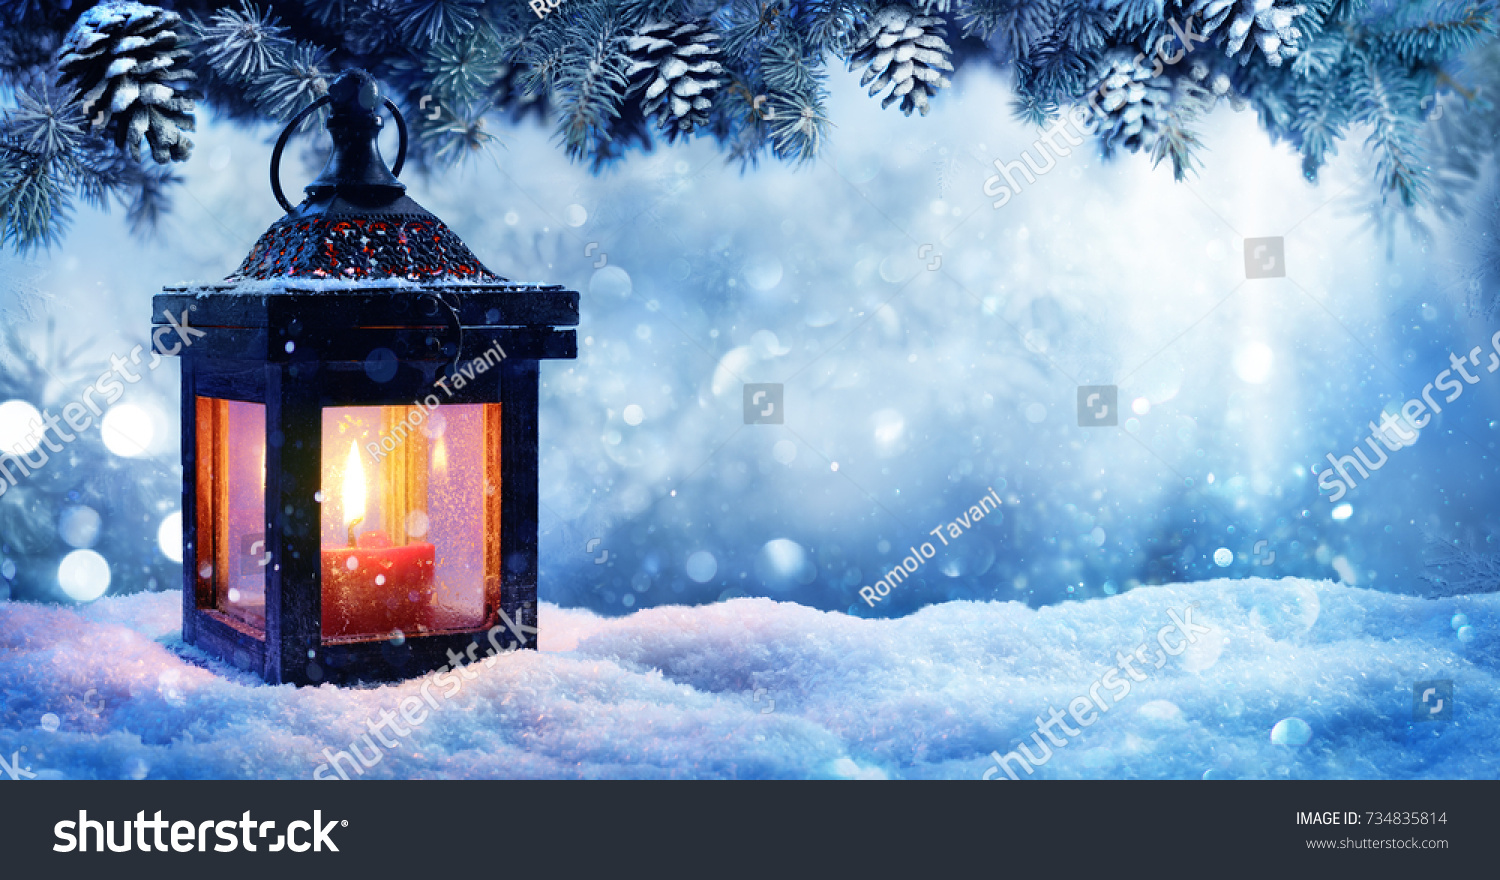 Christmas Lantern On Snow With Fir Branch In Evening Scene #734835814